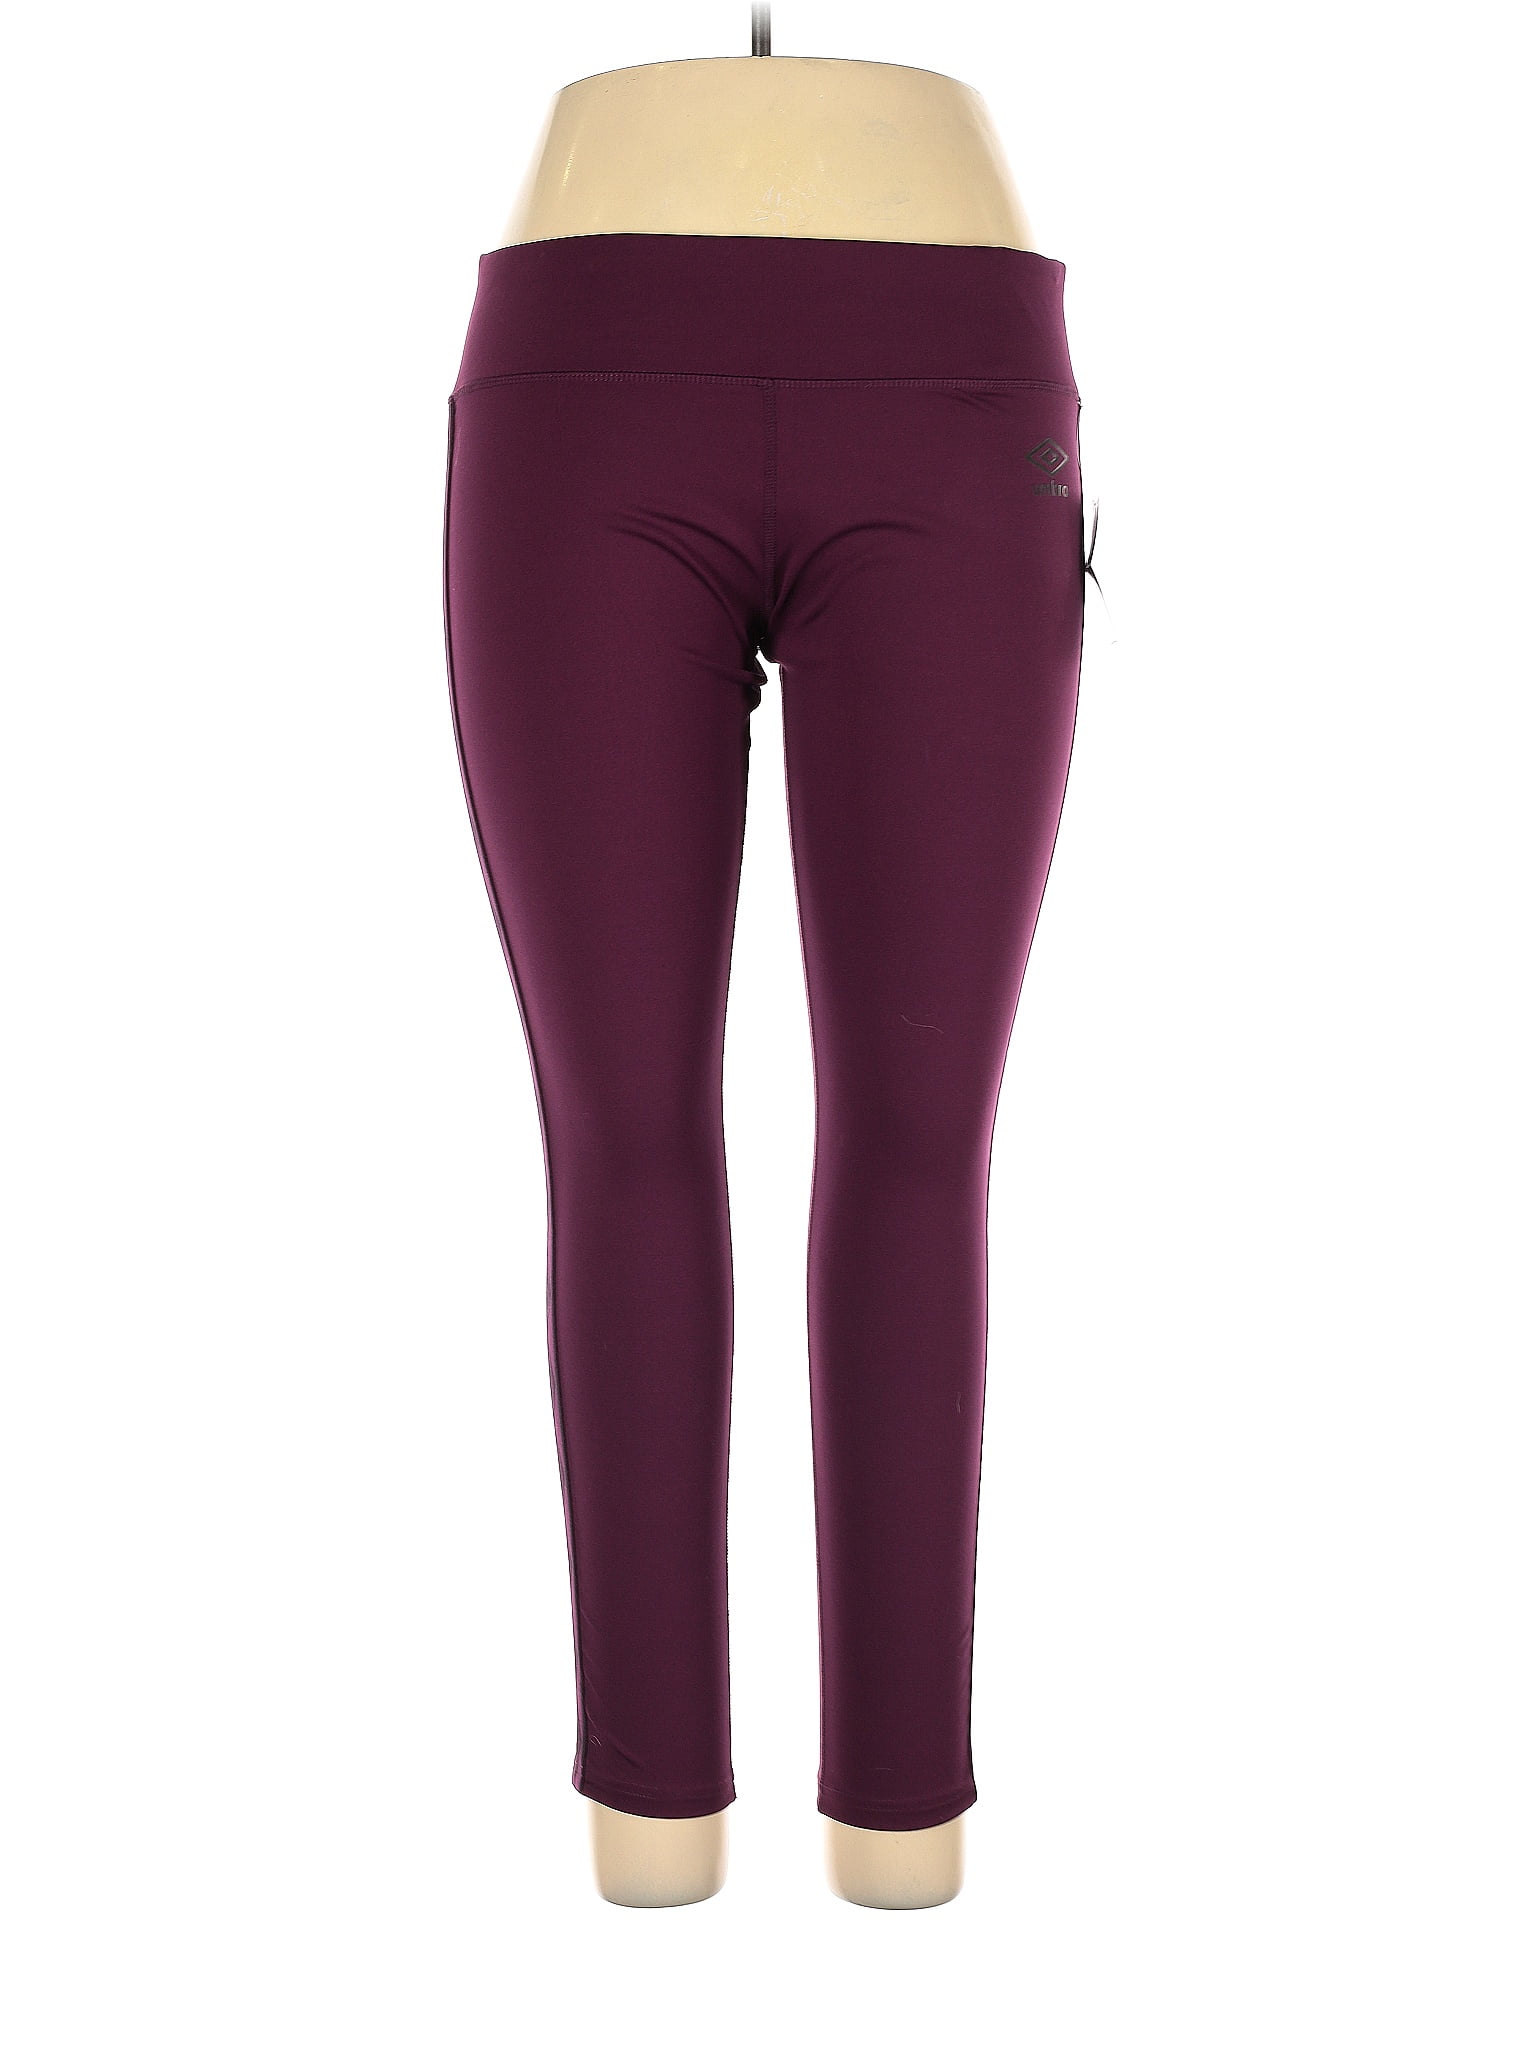 Zyia Active Navy Blue Leggings Size 6 - 47% off